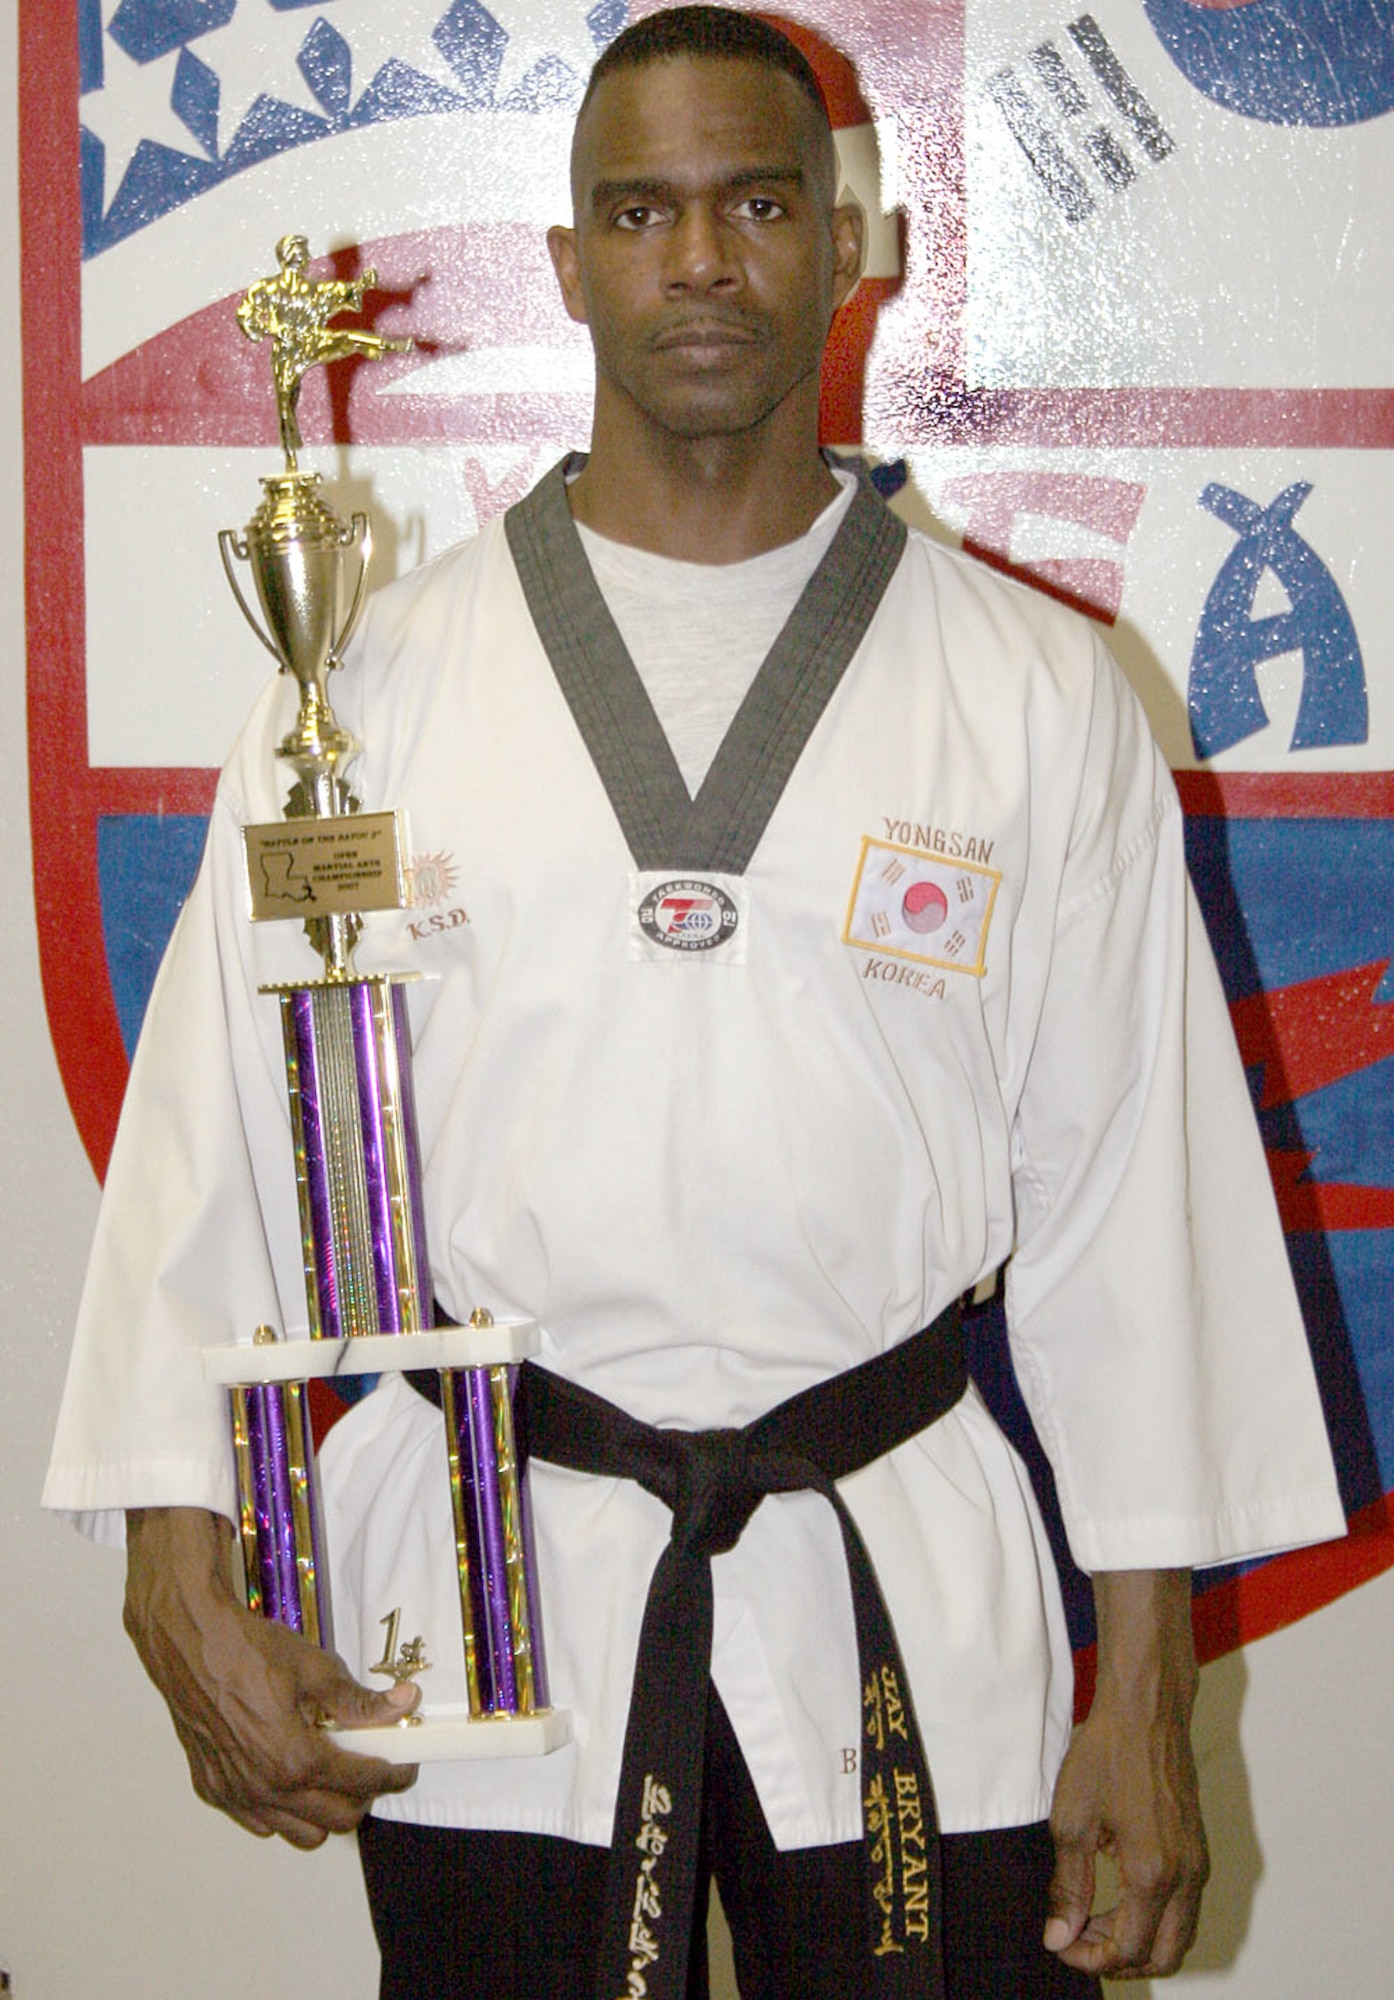 Master Sgt. Jay "Byrd" Bryant, 314th Airlift Wing Public Affairs Superintendent, poses with his first place trophy from The Battle of the Bayou Martial Arts Karate Championships in Shreveport, La., Feb 3. Bryant placed first in the men's over-40 free sparring, black belt division. "I was definitely in shock and completely in awe," said a smiling Master Sgt. Jay "Byrd" Bryant, 314th Airlift Wing Public Affairs Superintendent. Bryant placed first in the men's over-40 free sparring, black belt division. "This was my first competition in 18 years and my first as a black belt," Sergeant Bryant said. "I've been in and out of martial arts for the past four or five years, but during my tour in Seoul, Korea last year, I decided to get serious with it and starting training really hard. Needless to say, I was a bit skeptical of doing well, but after stepping onto that floor and hearing my friends and teammates cheer me on, I was good to go." (Courtesy photo)